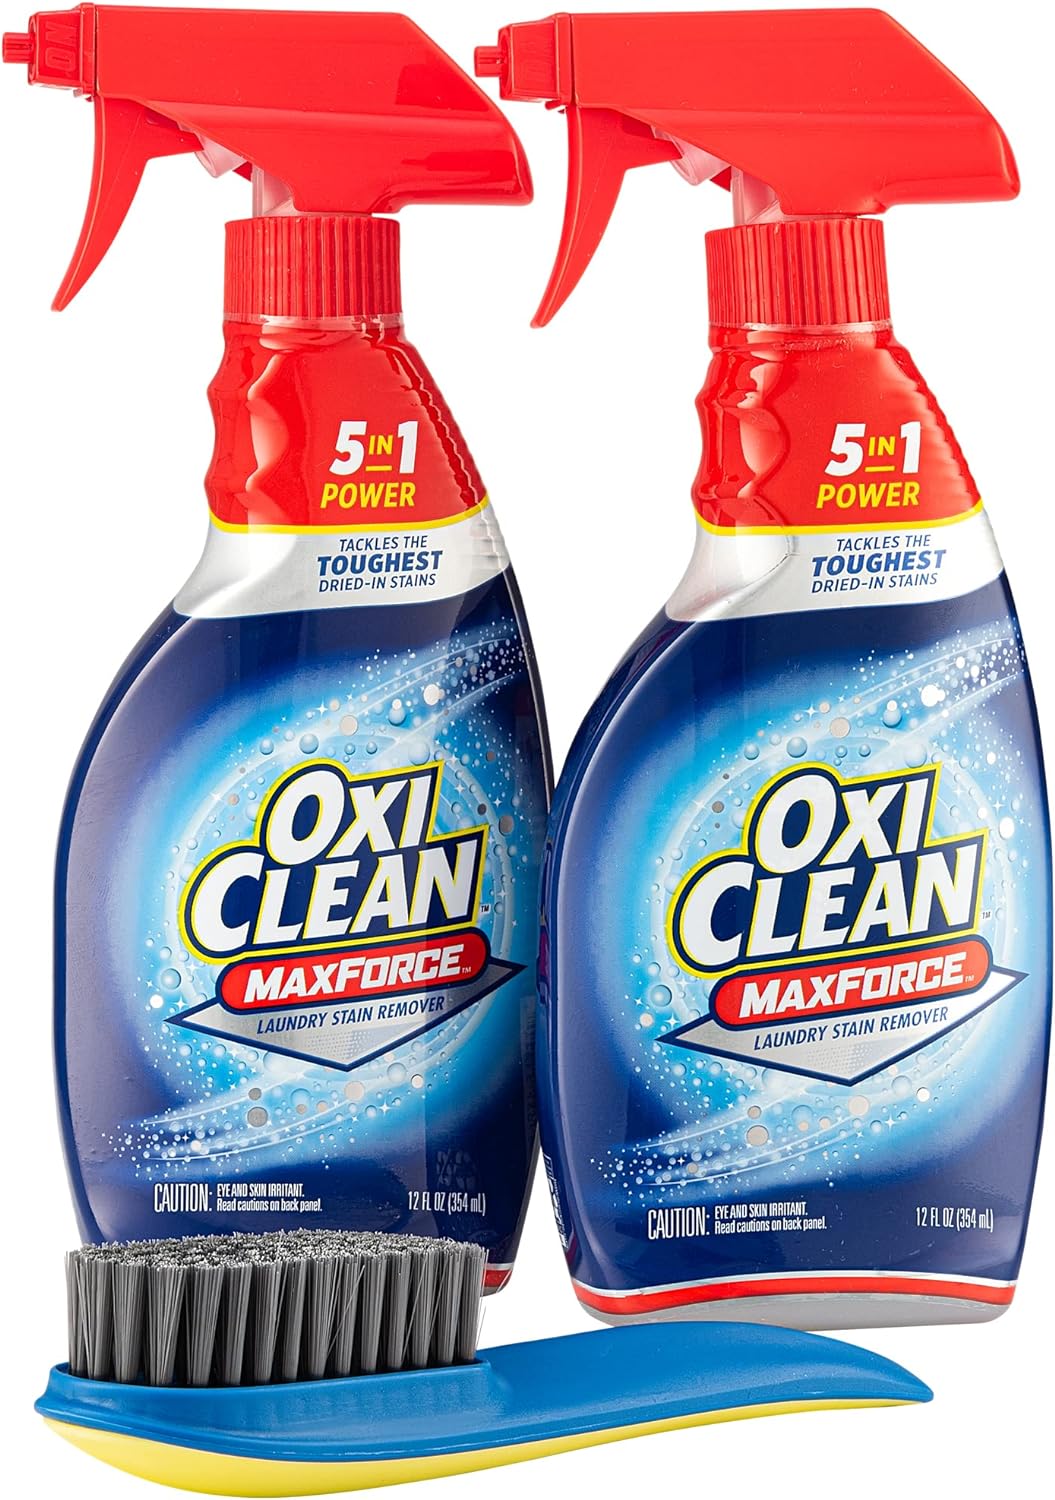 2 Oxi, Clean® Max Force Spray, Laundry Stain Remover, 12 Ounce, Bundle with ZIVIGO Laundry Stain Brush for Scrubbing Out Tough Stains, : Health & Household